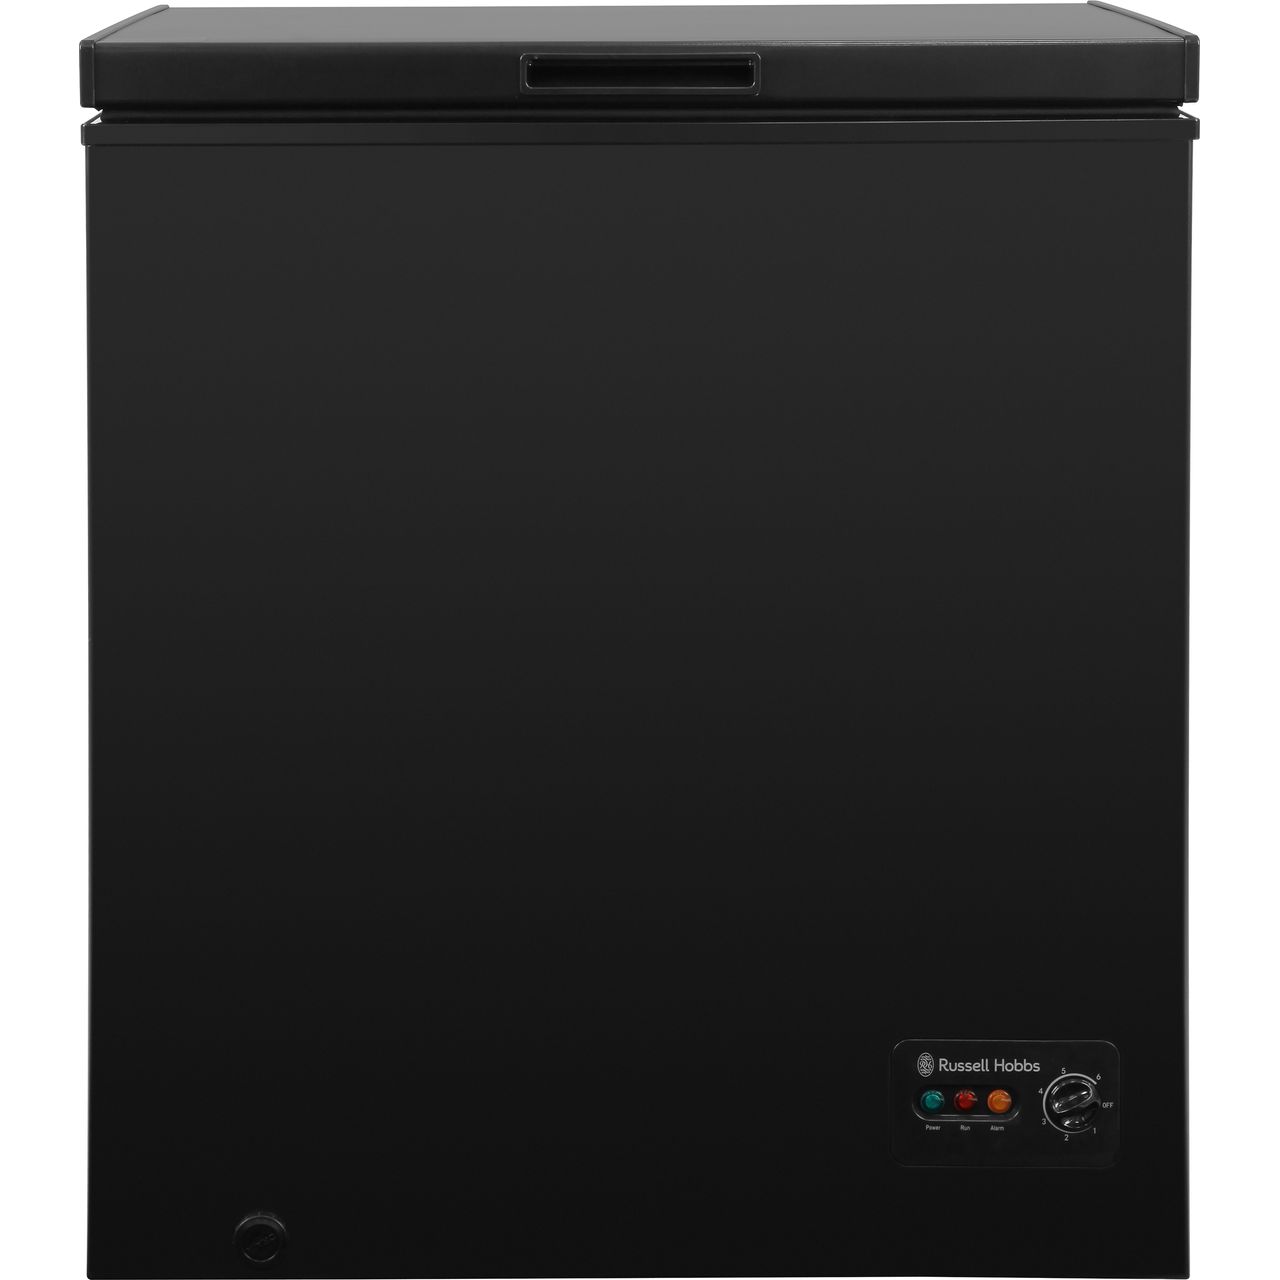 Russell Hobbs RHCF142B Chest Freezer Review